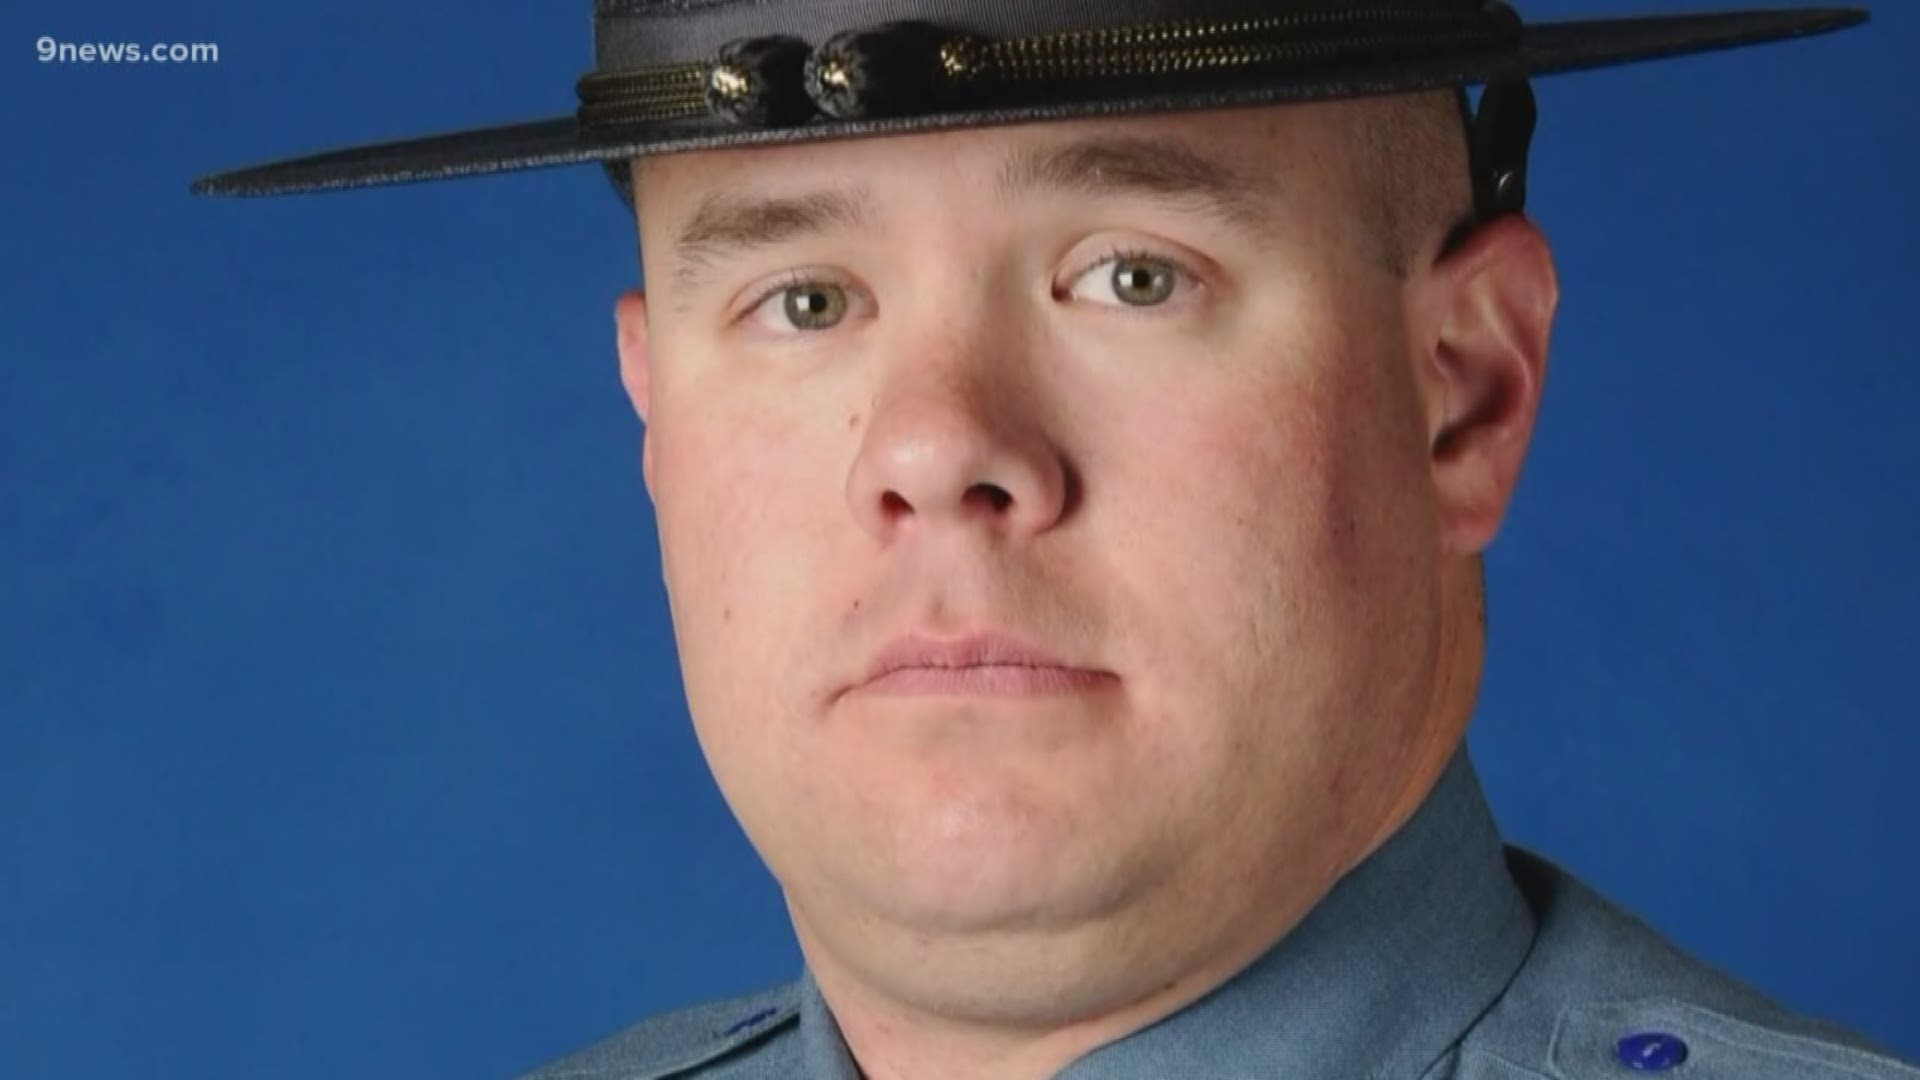 Trooper William Moden was struck and killed while investigating an earlier crash on Interstate 70 near Deer Trail.